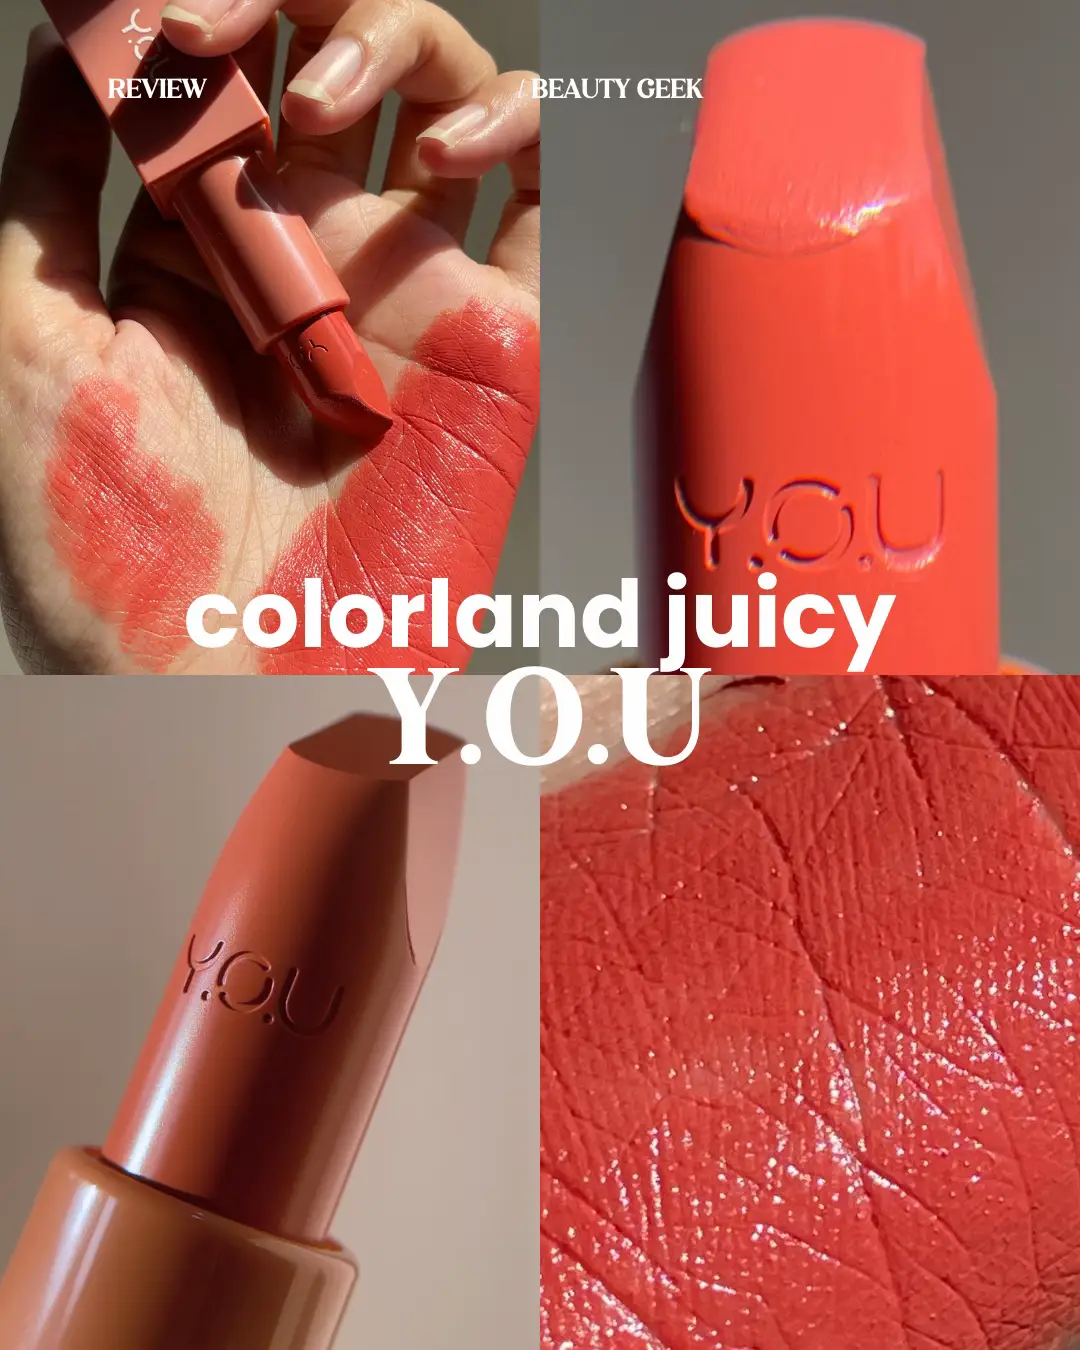 SWATCH + REVIEW YOU Colorland Juicy Pop Lipstick, Gallery posted by Laras